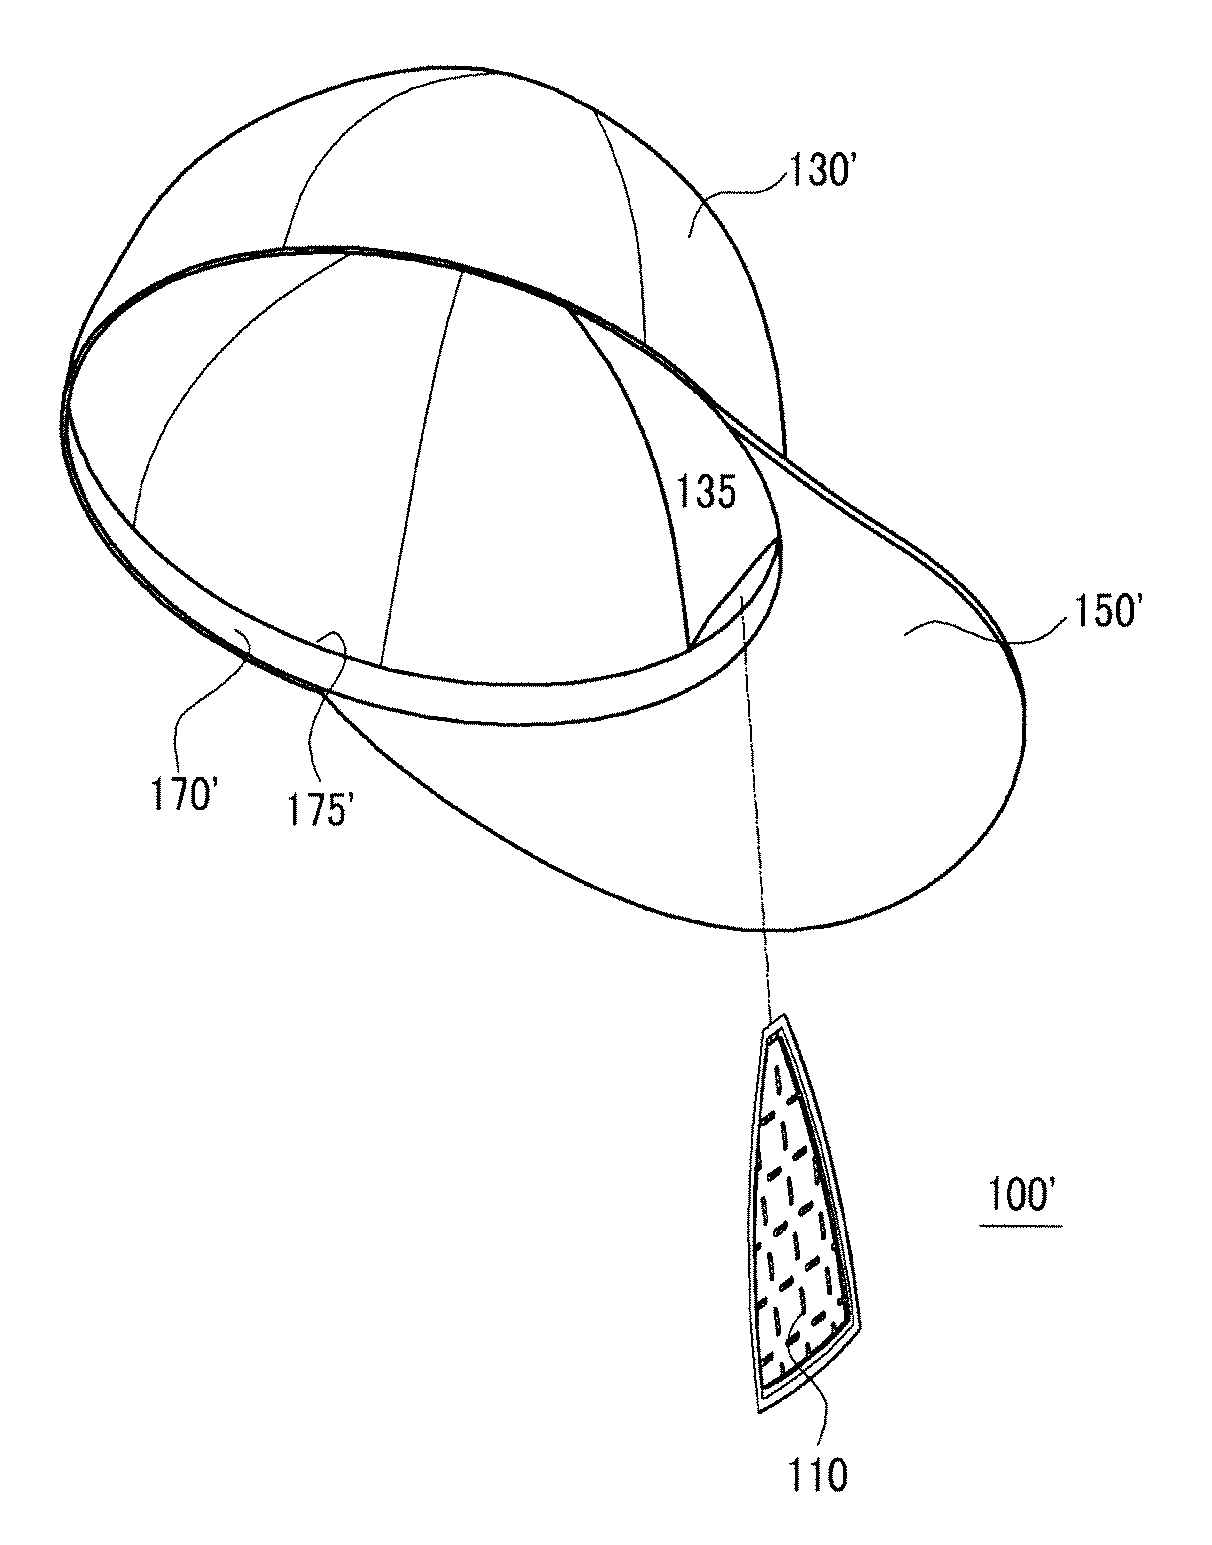 Flexile Plated Cooling Pack of Headwear and Method for Making the Same